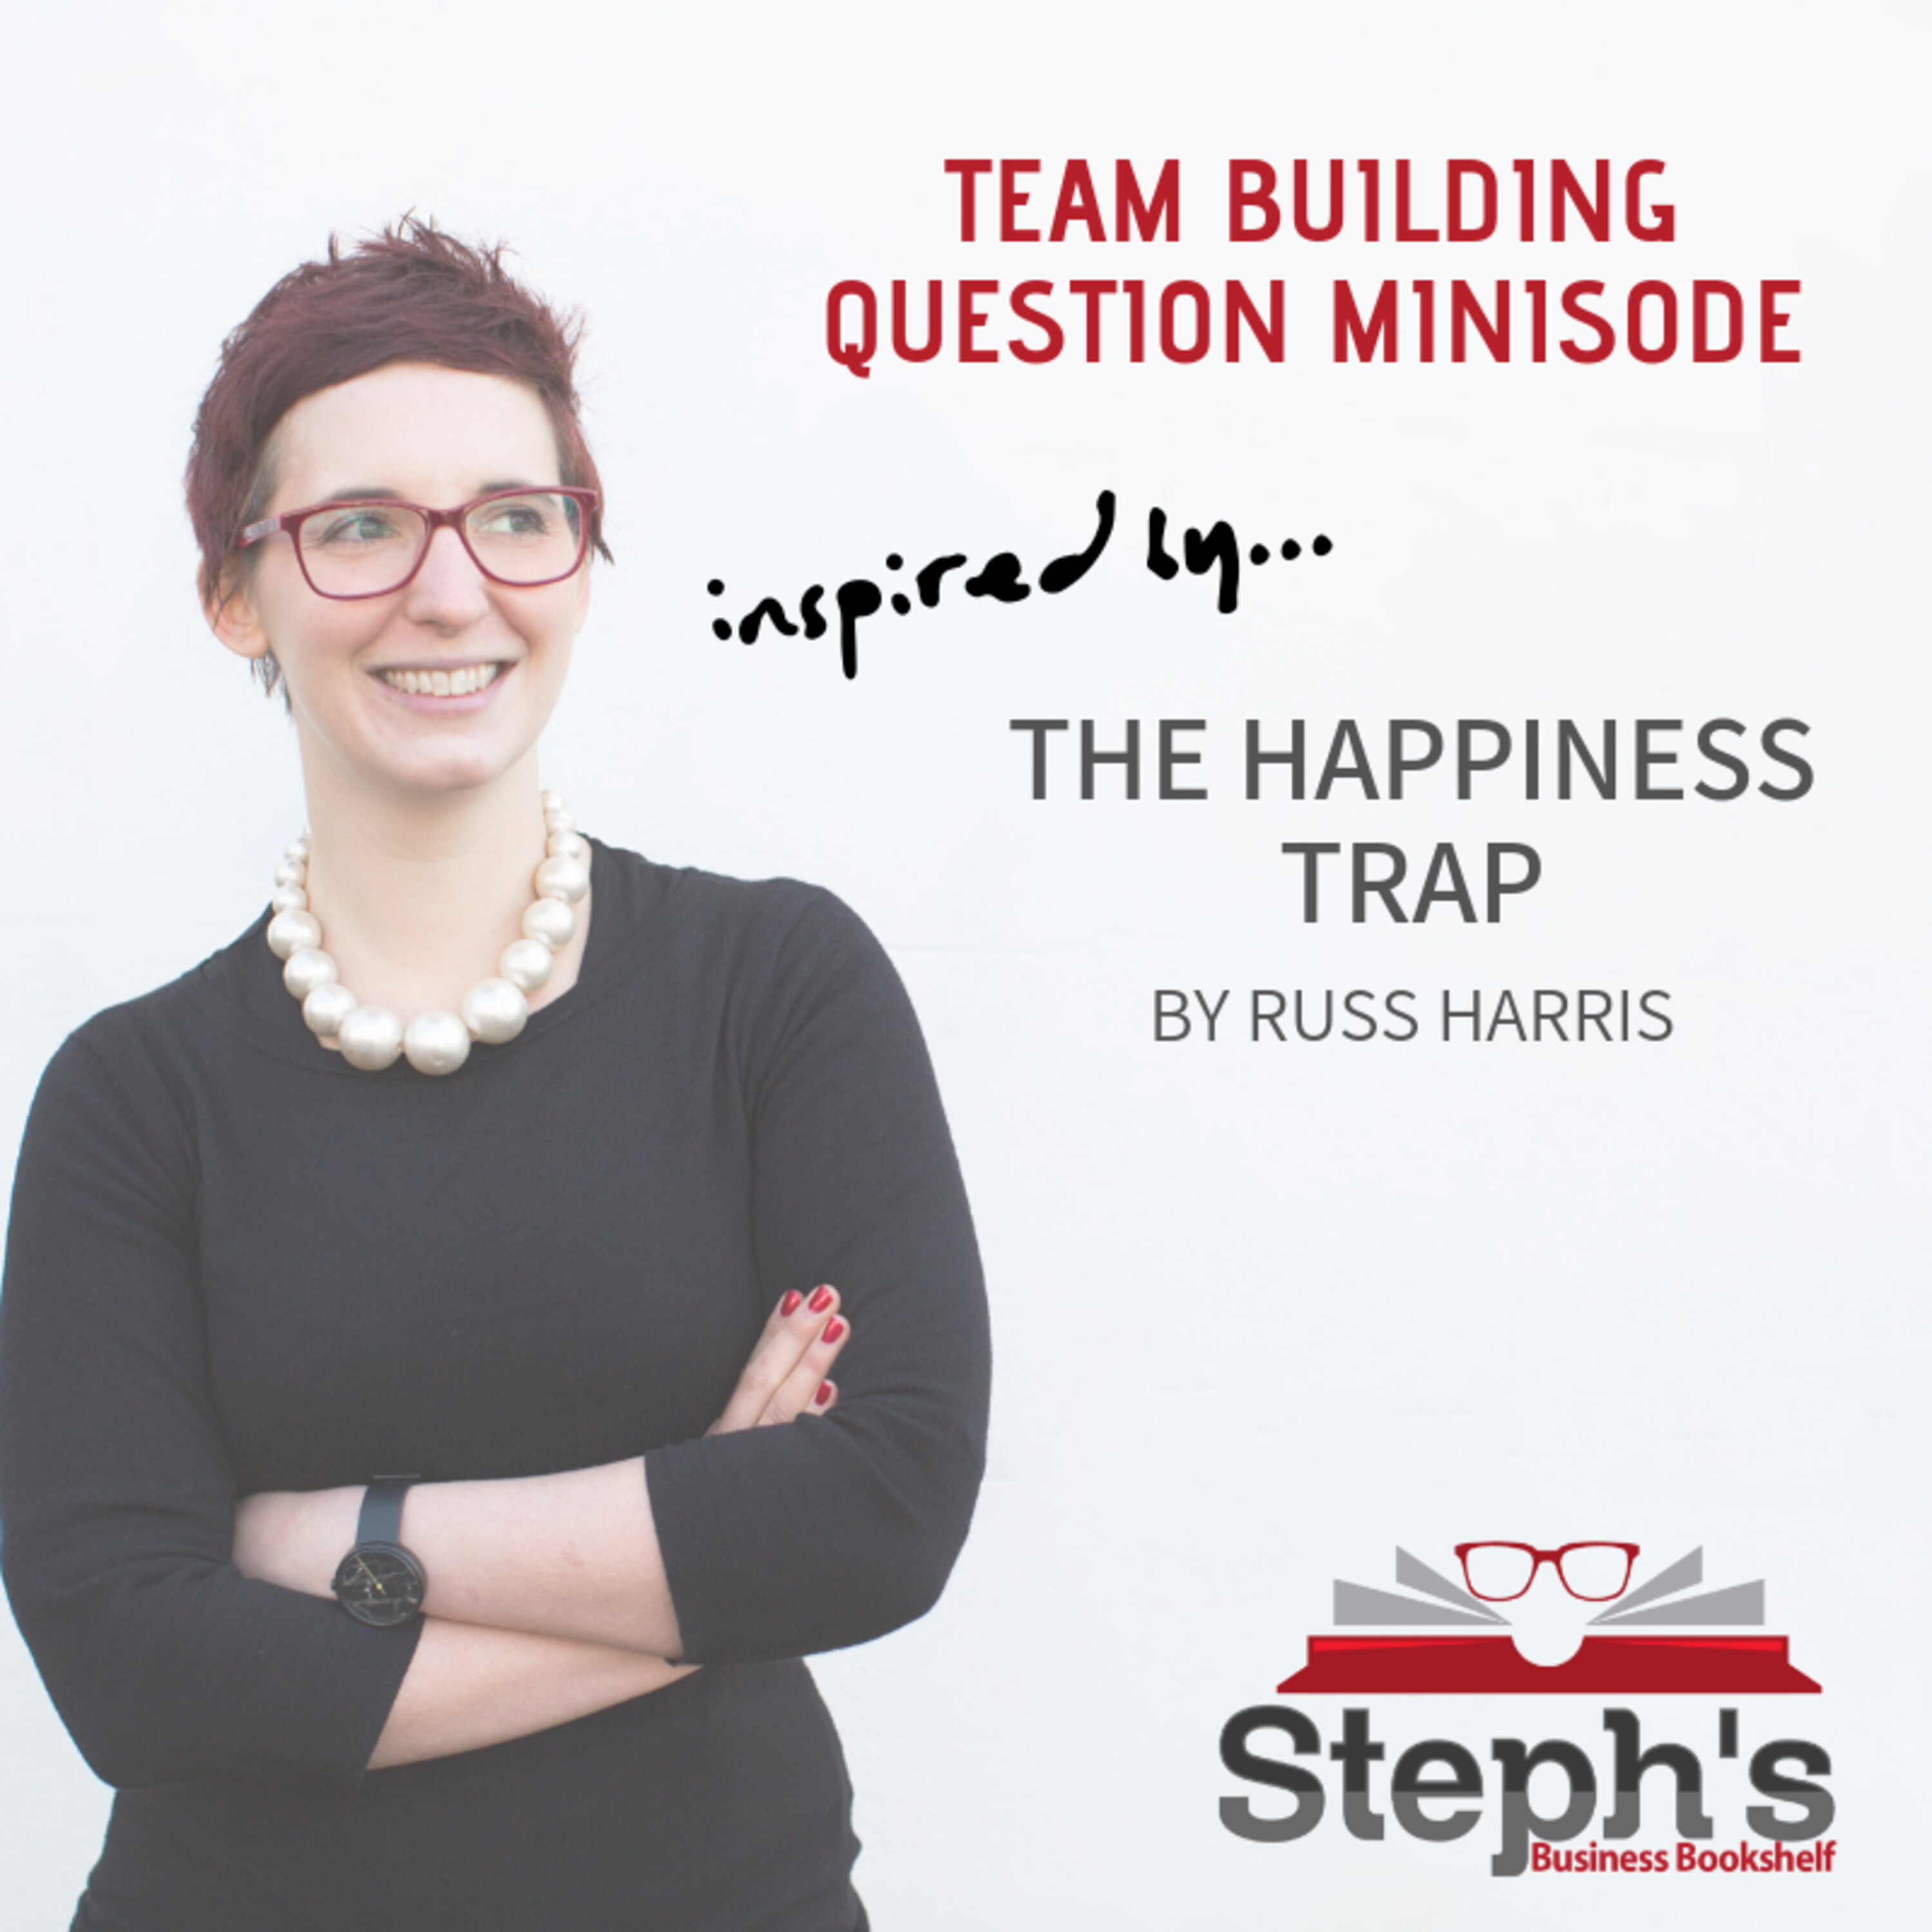 The Happiness Trap: Team Building Question